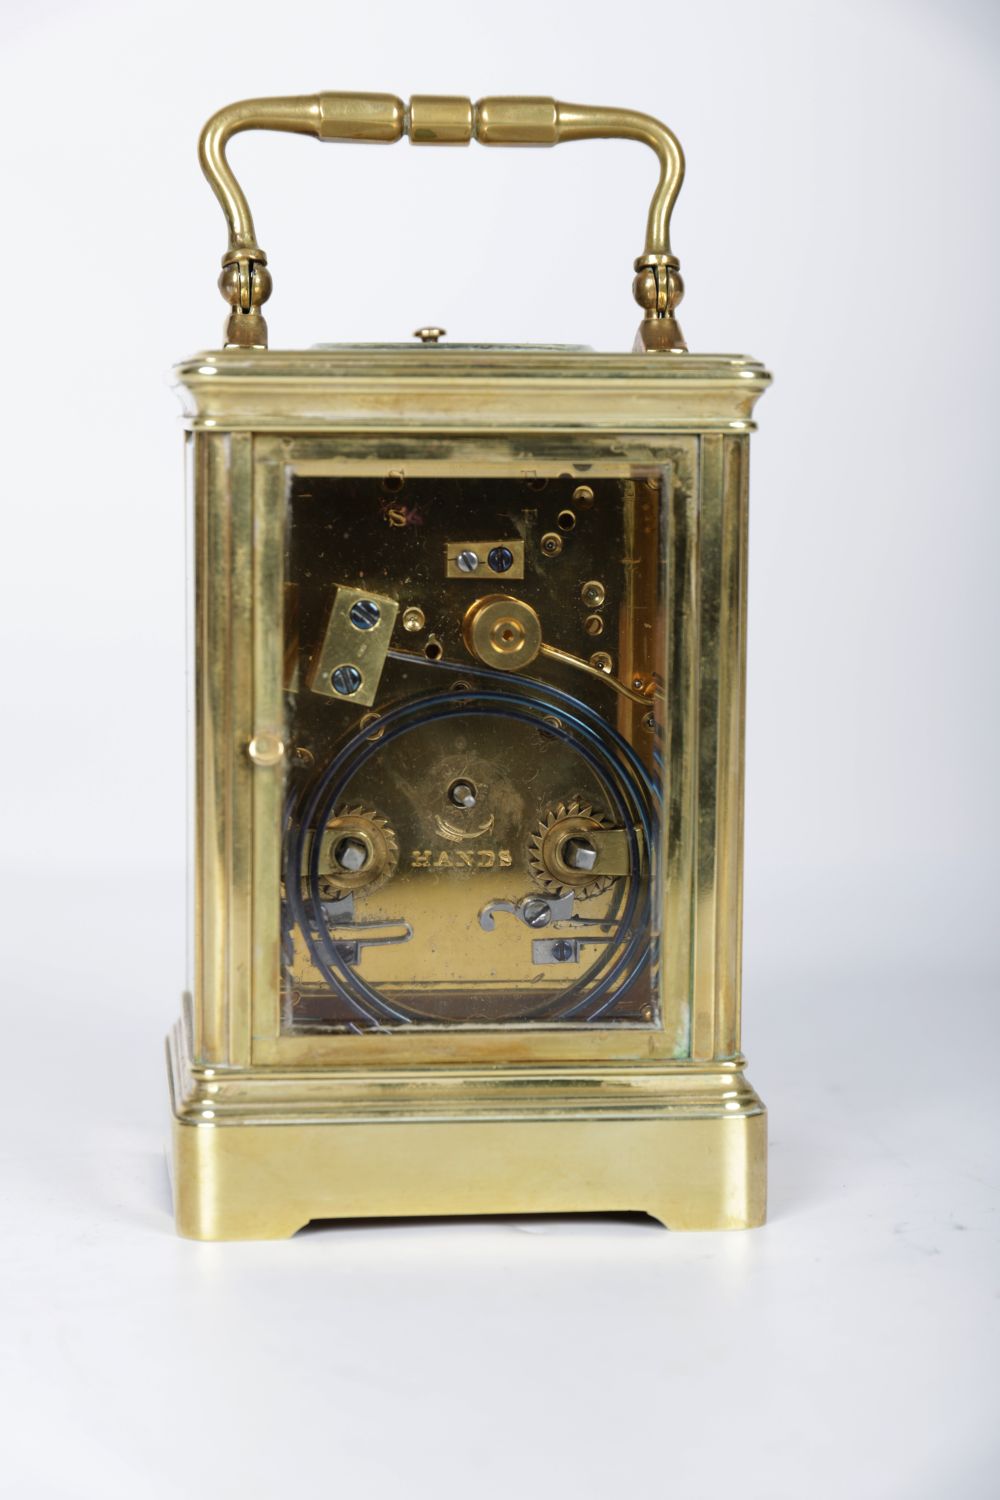 19TH-CENTURY FRENCH BRASS CARRIAGE CLOCK - Image 4 of 4